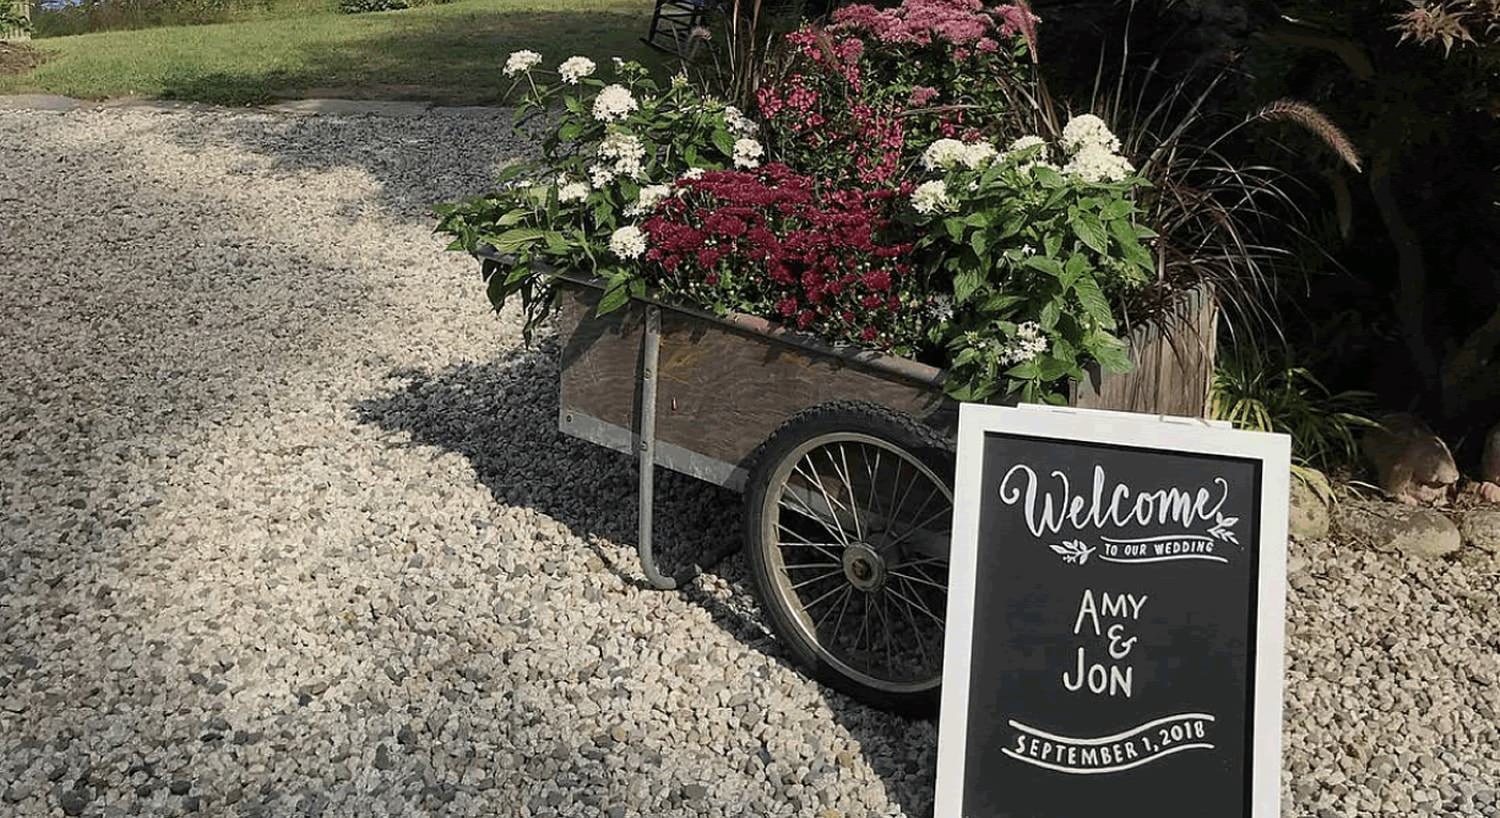 Antique wheelbarrow filled with flowers on gravel with a Welcome to our Wedding sign